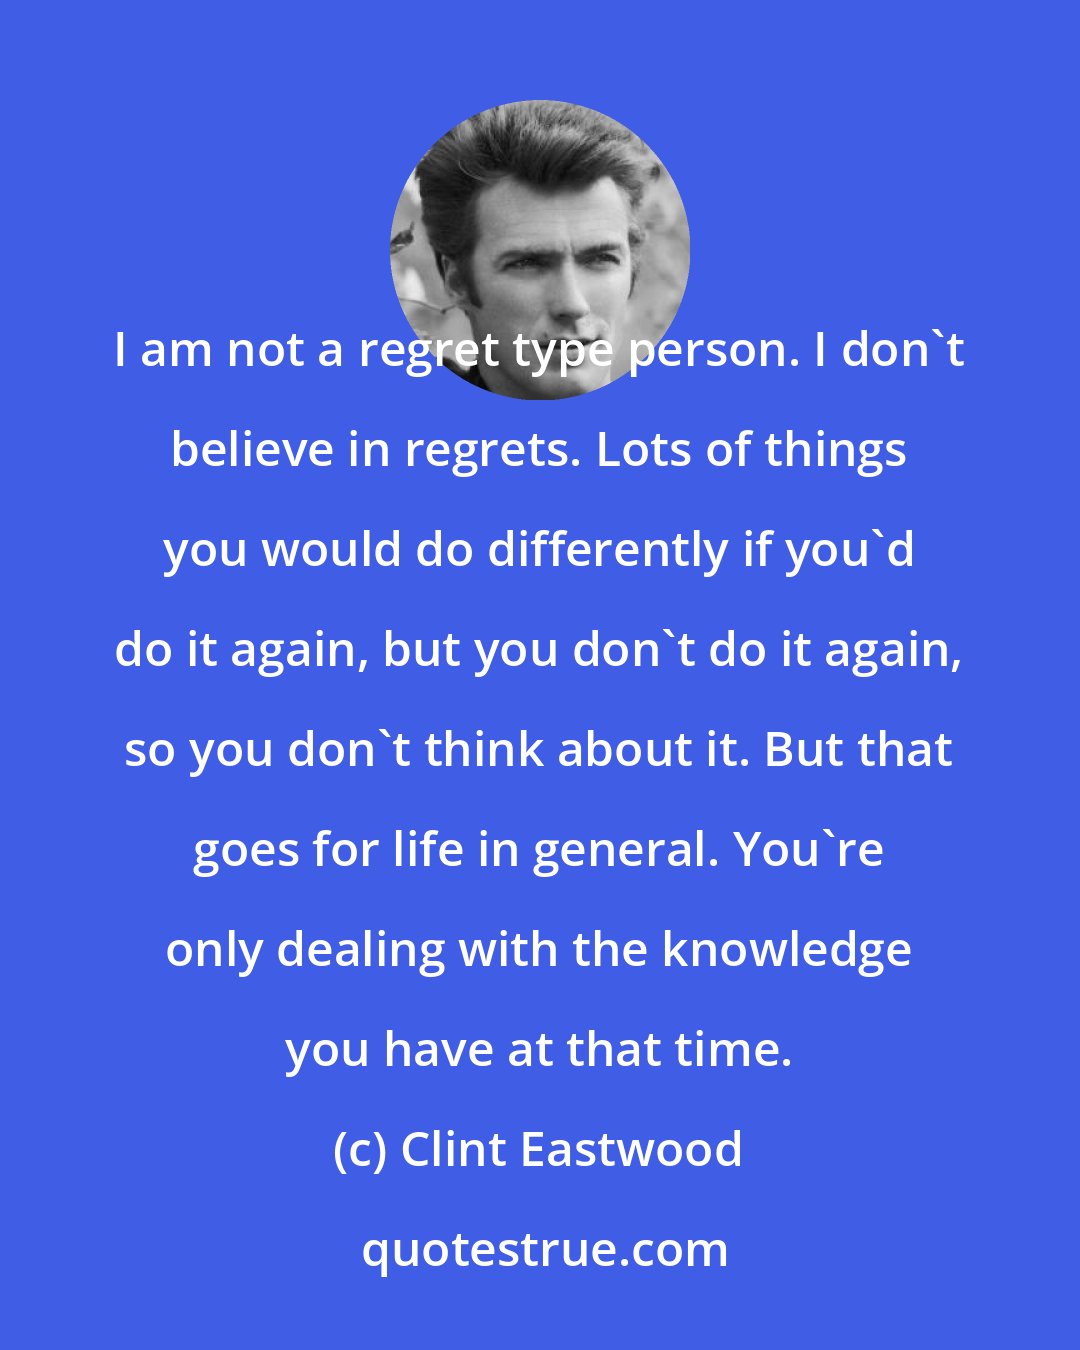 Clint Eastwood: I am not a regret type person. I don't believe in regrets. Lots of things you would do differently if you'd do it again, but you don't do it again, so you don't think about it. But that goes for life in general. You're only dealing with the knowledge you have at that time.